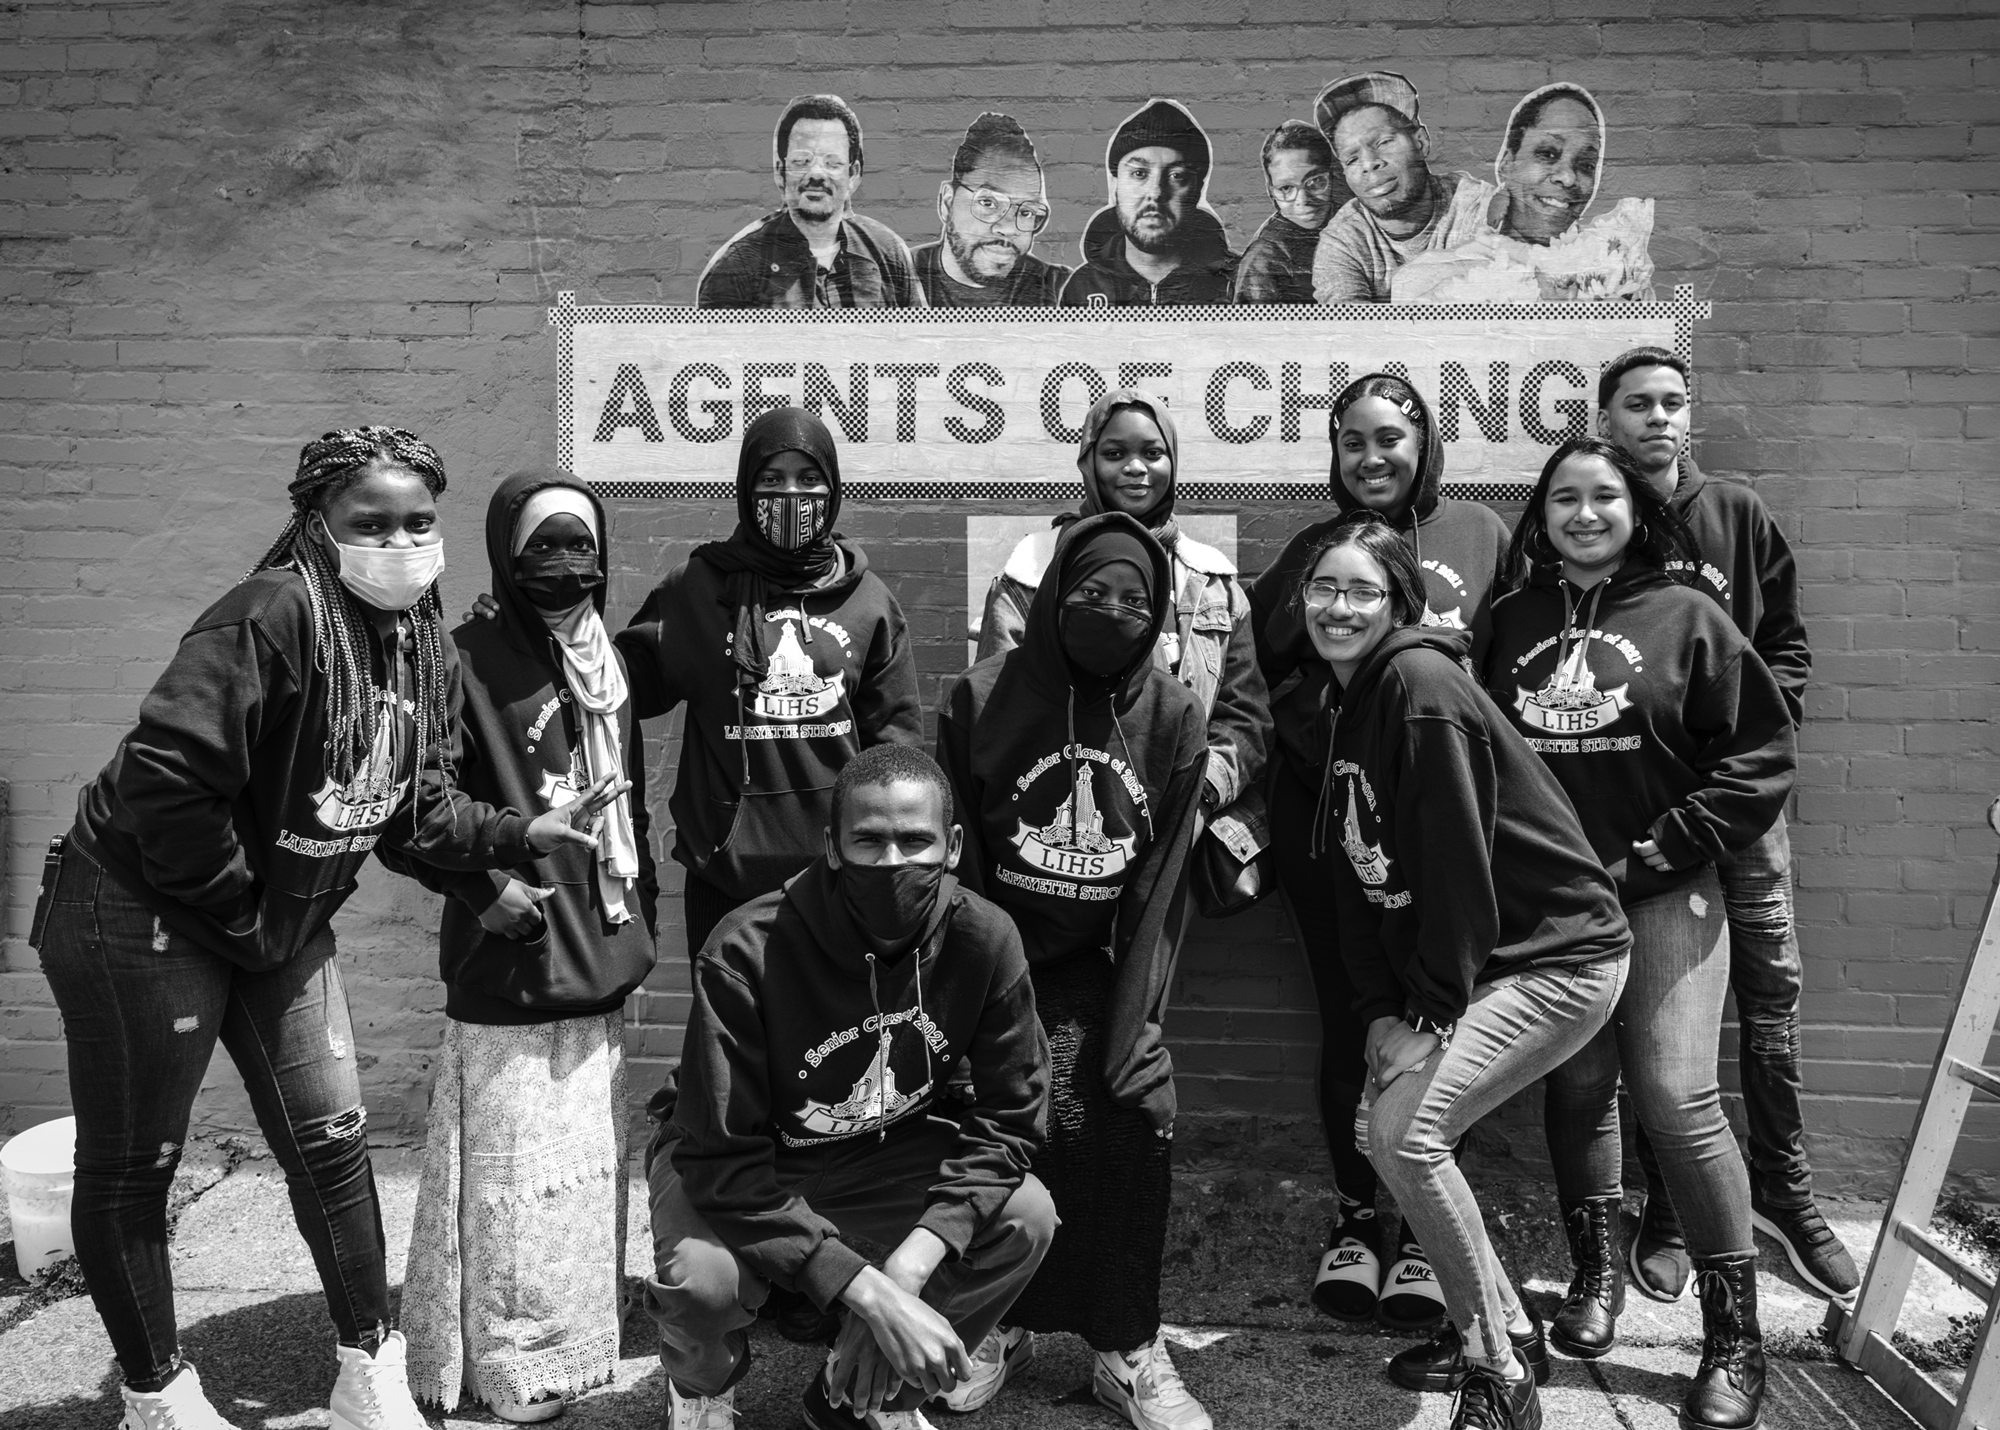 black and white photo of a group of people standing in front of the agents of change sign on the side of a brick building